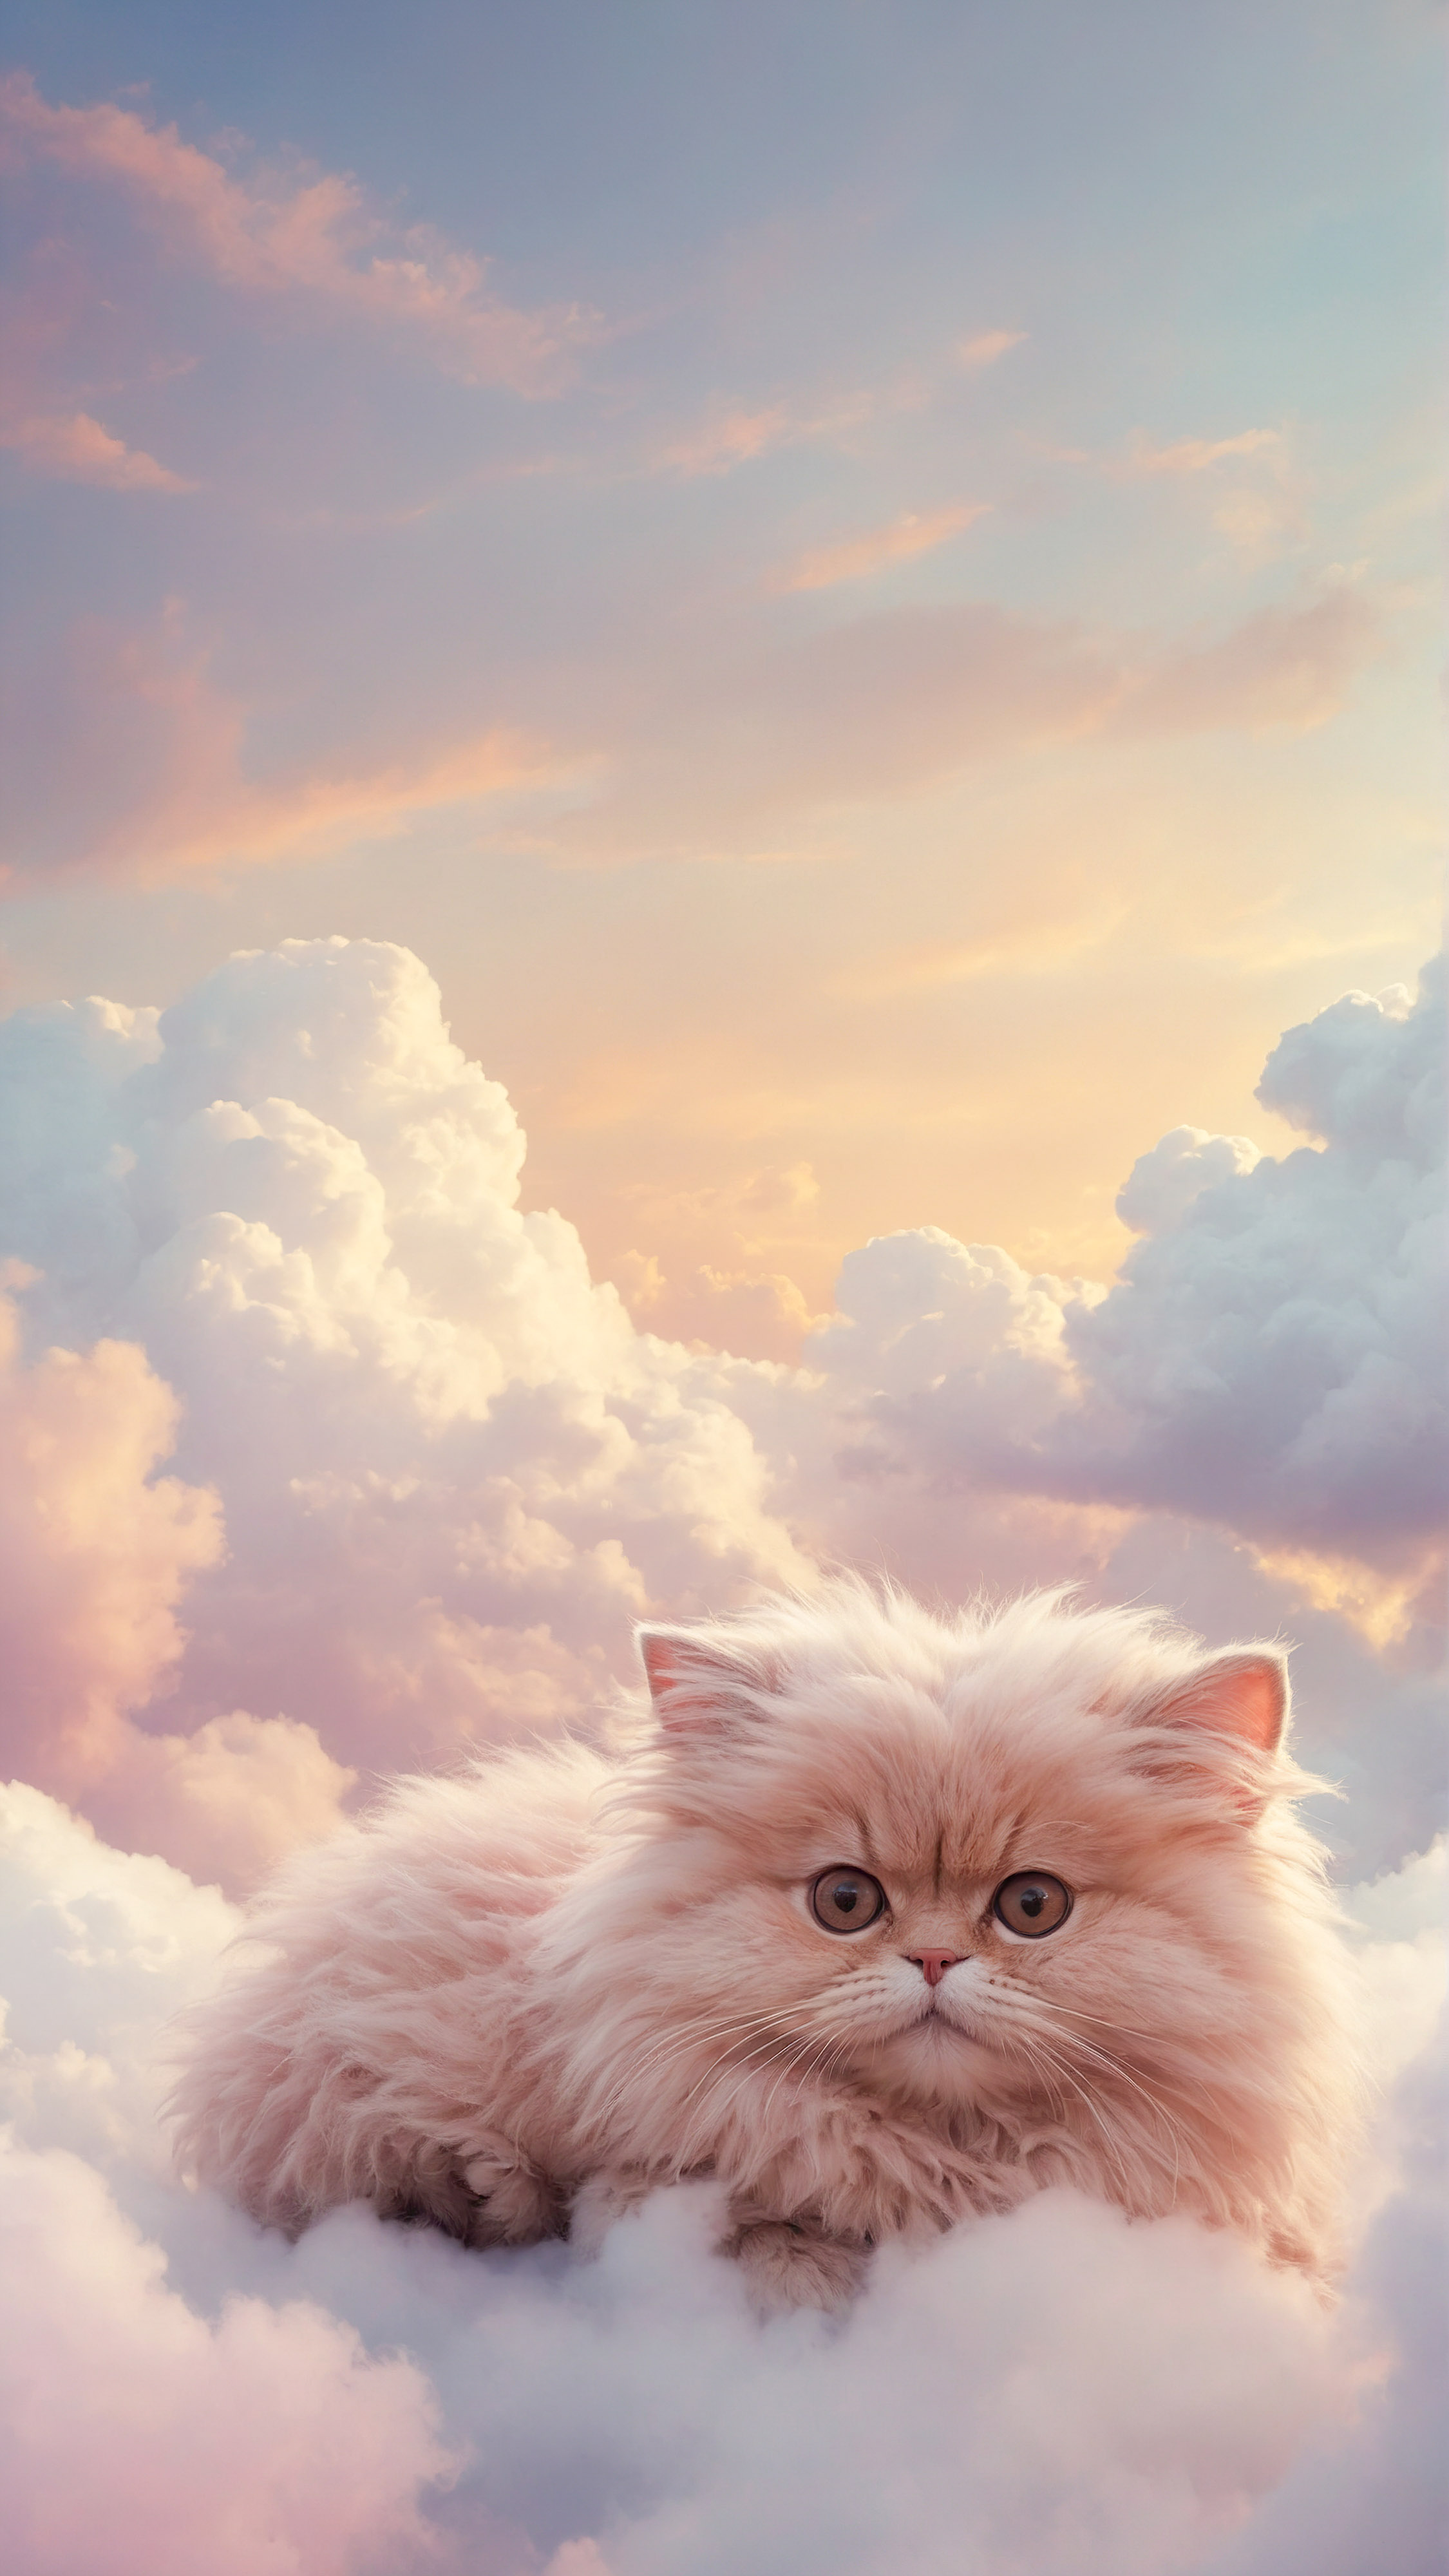 Discover the softness of a fluffy kitty sitting amidst soft clouds under a pastel sky, with our feline-themed cute wallpaper for your iPhone.